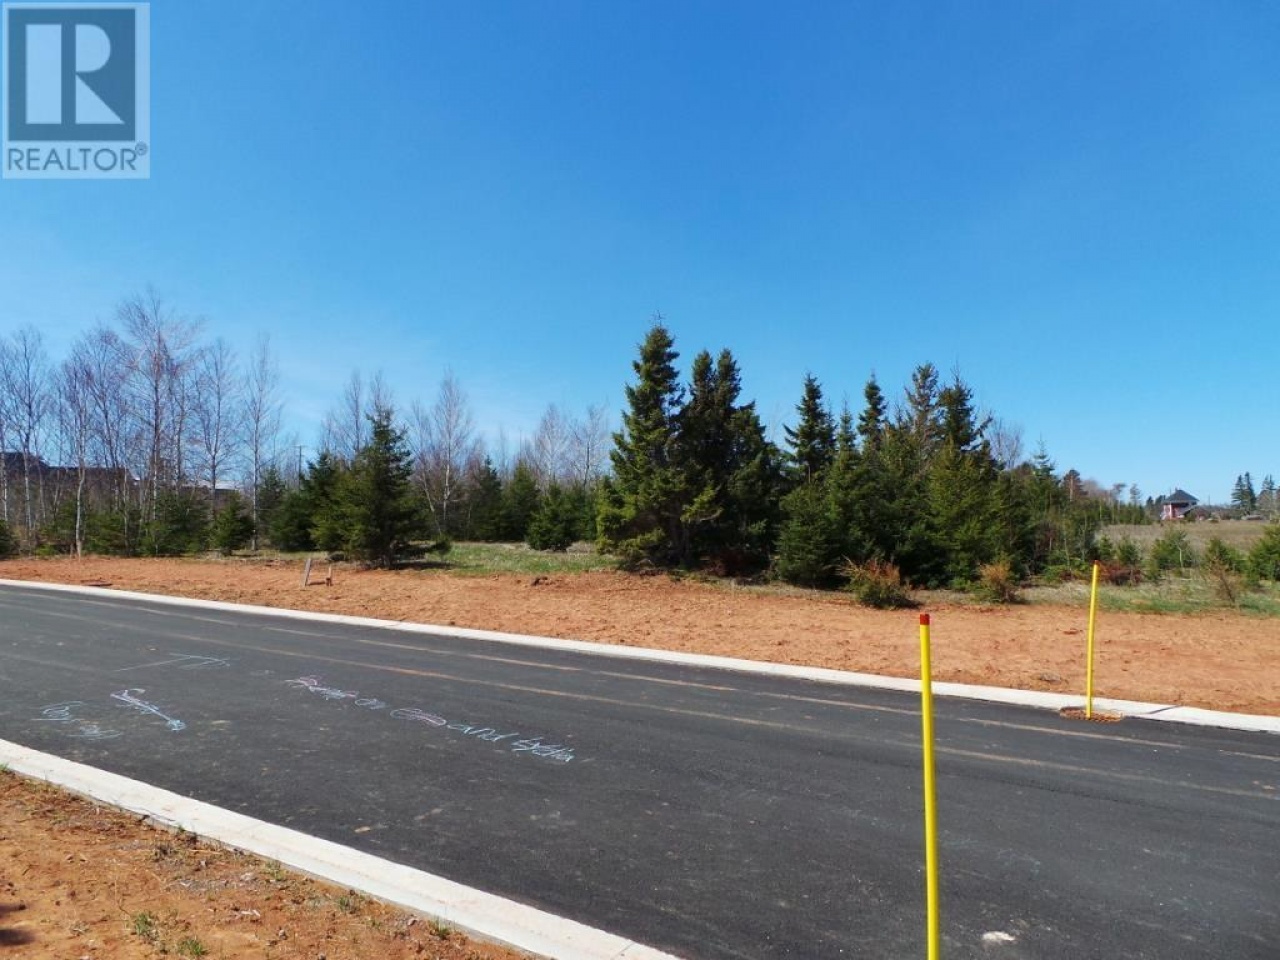 Lot 20-1 Waterview HeightsLot 20-1 Waterview Heights, Summerside, Prince Edward Island C1N6H5, ,Vacant Land,For Sale,Lot 20-1 Waterview Heights,202111401